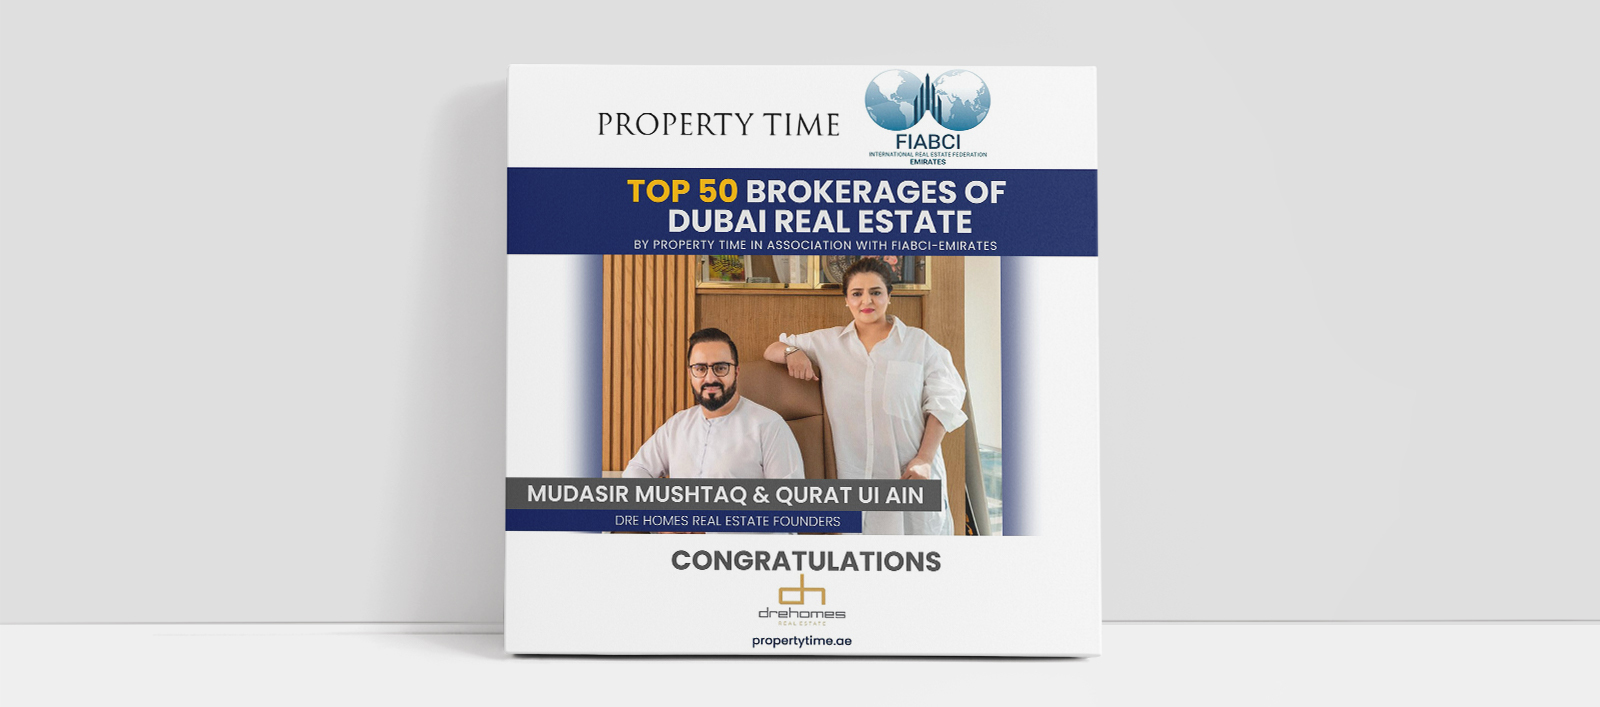 Drehomes Founders Secure Spot in Top 50 Brokerages of Dubai Real Estate